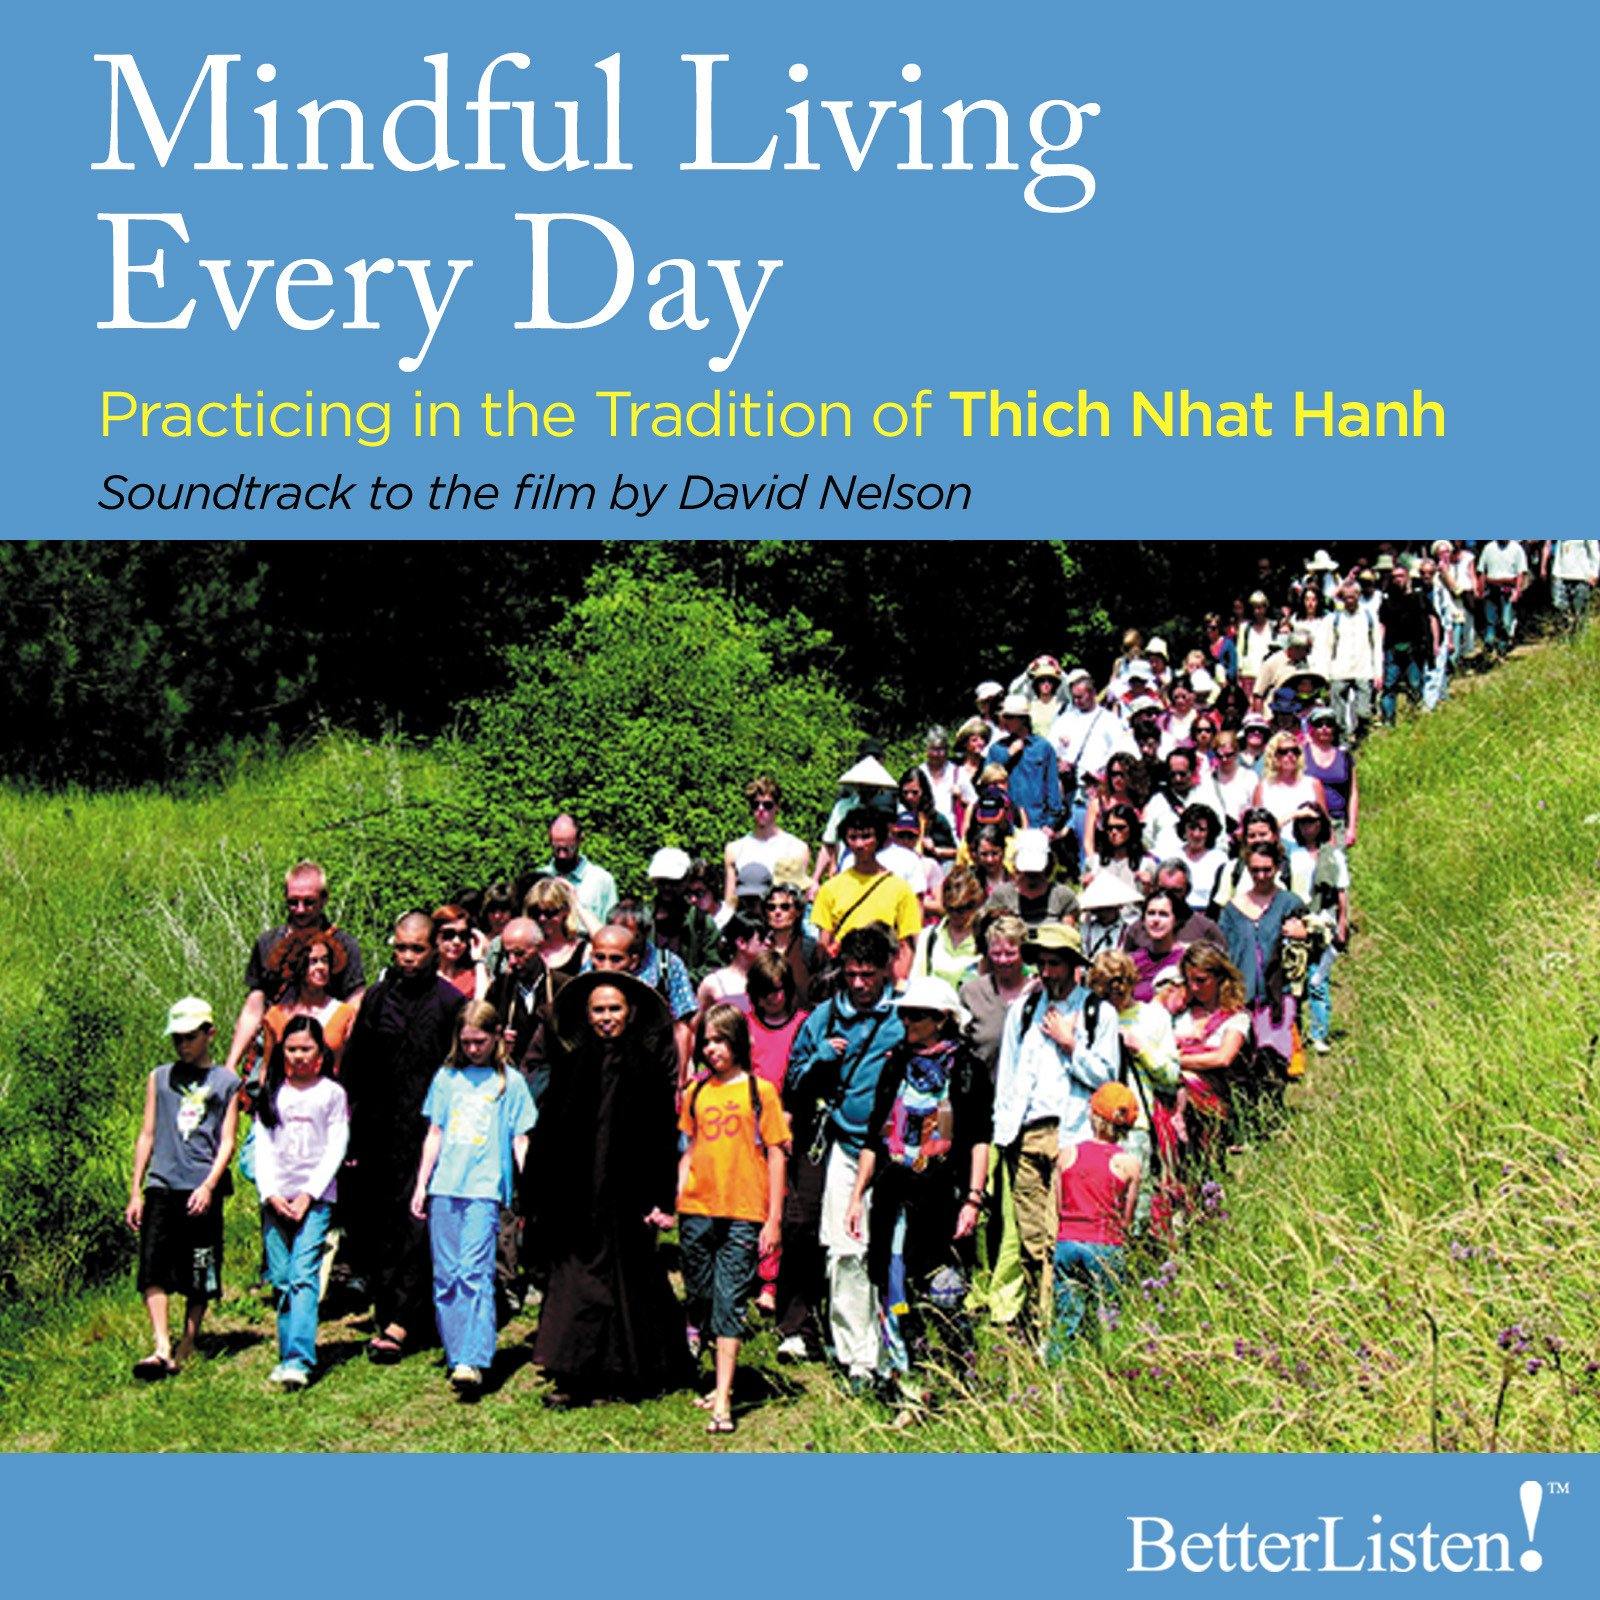 Mindful Living Every Day Practicing in the Tradition of Thich Nhat Hanh video Parallax Press - BetterListen!